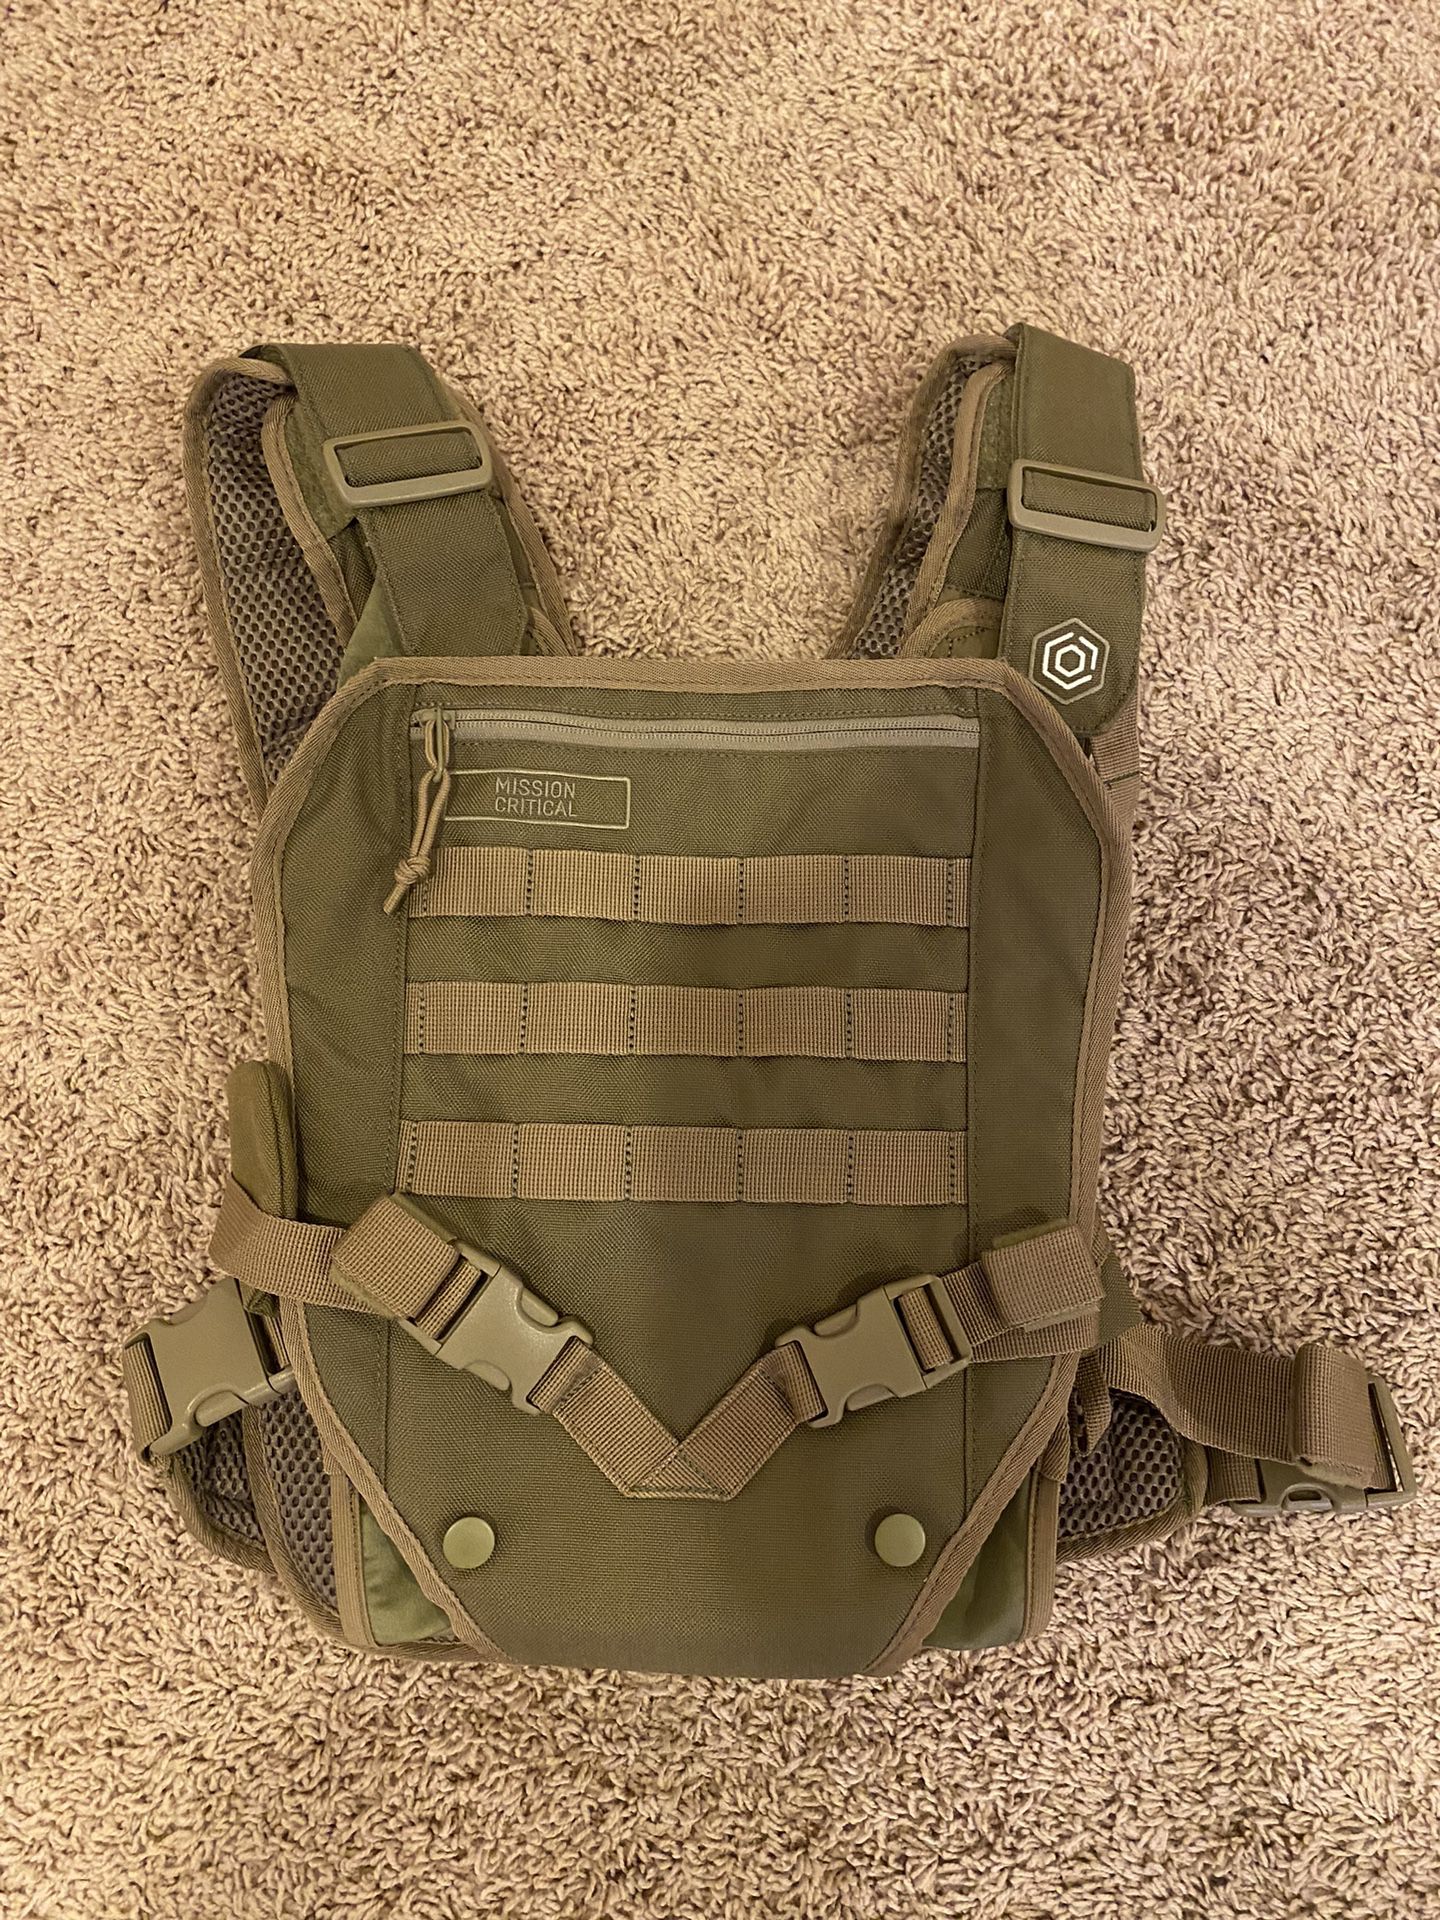 Mission Critical baby carrier